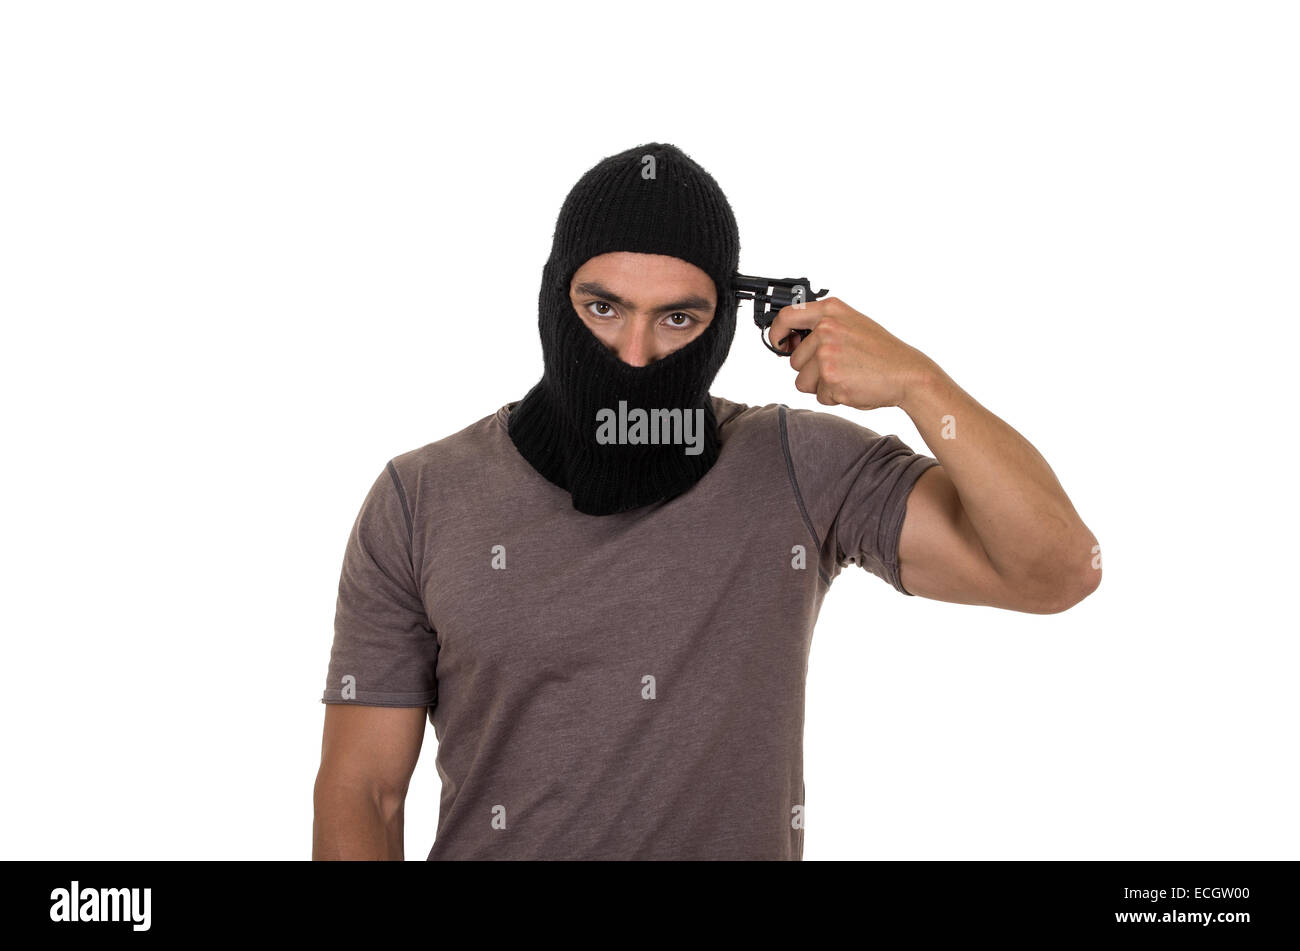 male thief wearing mask and holding gun isolated Stock Photo